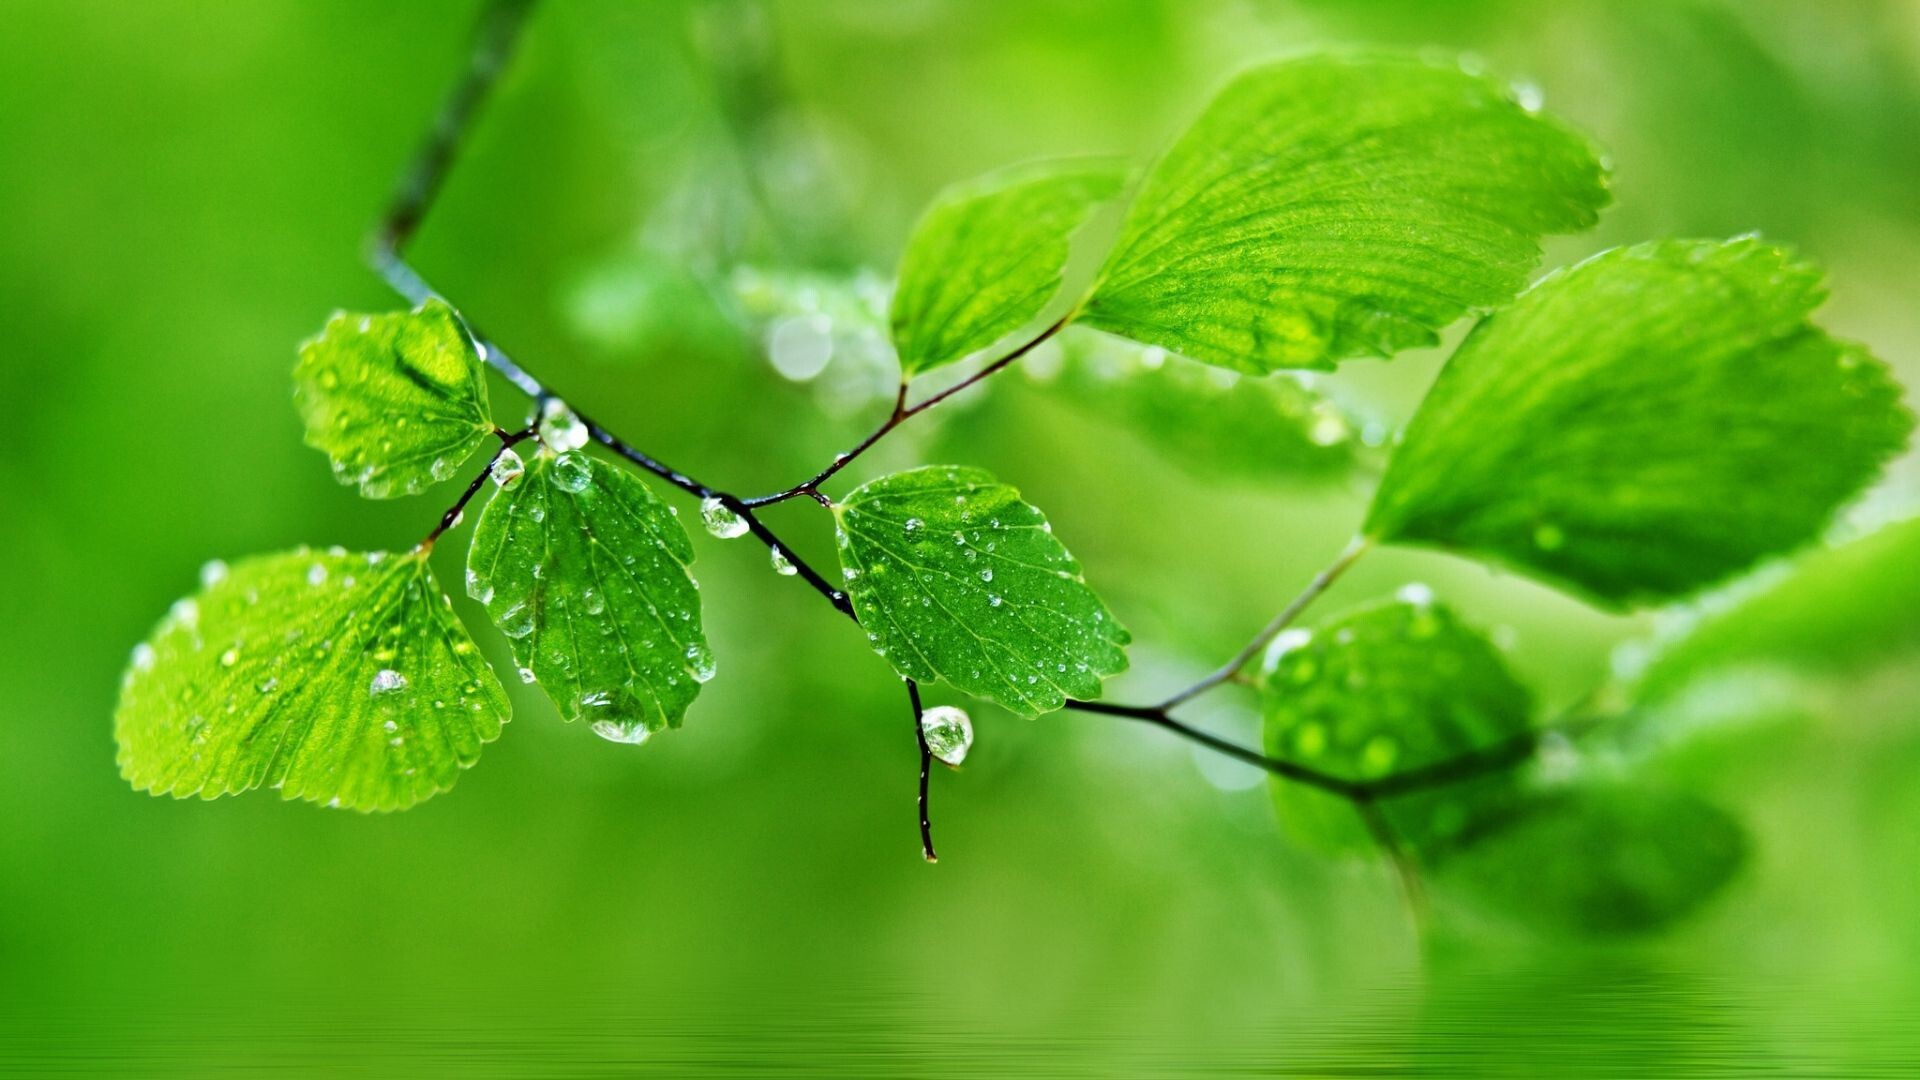 Go Green: Water droplets on green leaves, Dew, Moisture evaporating from plants. 1920x1080 Full HD Wallpaper.